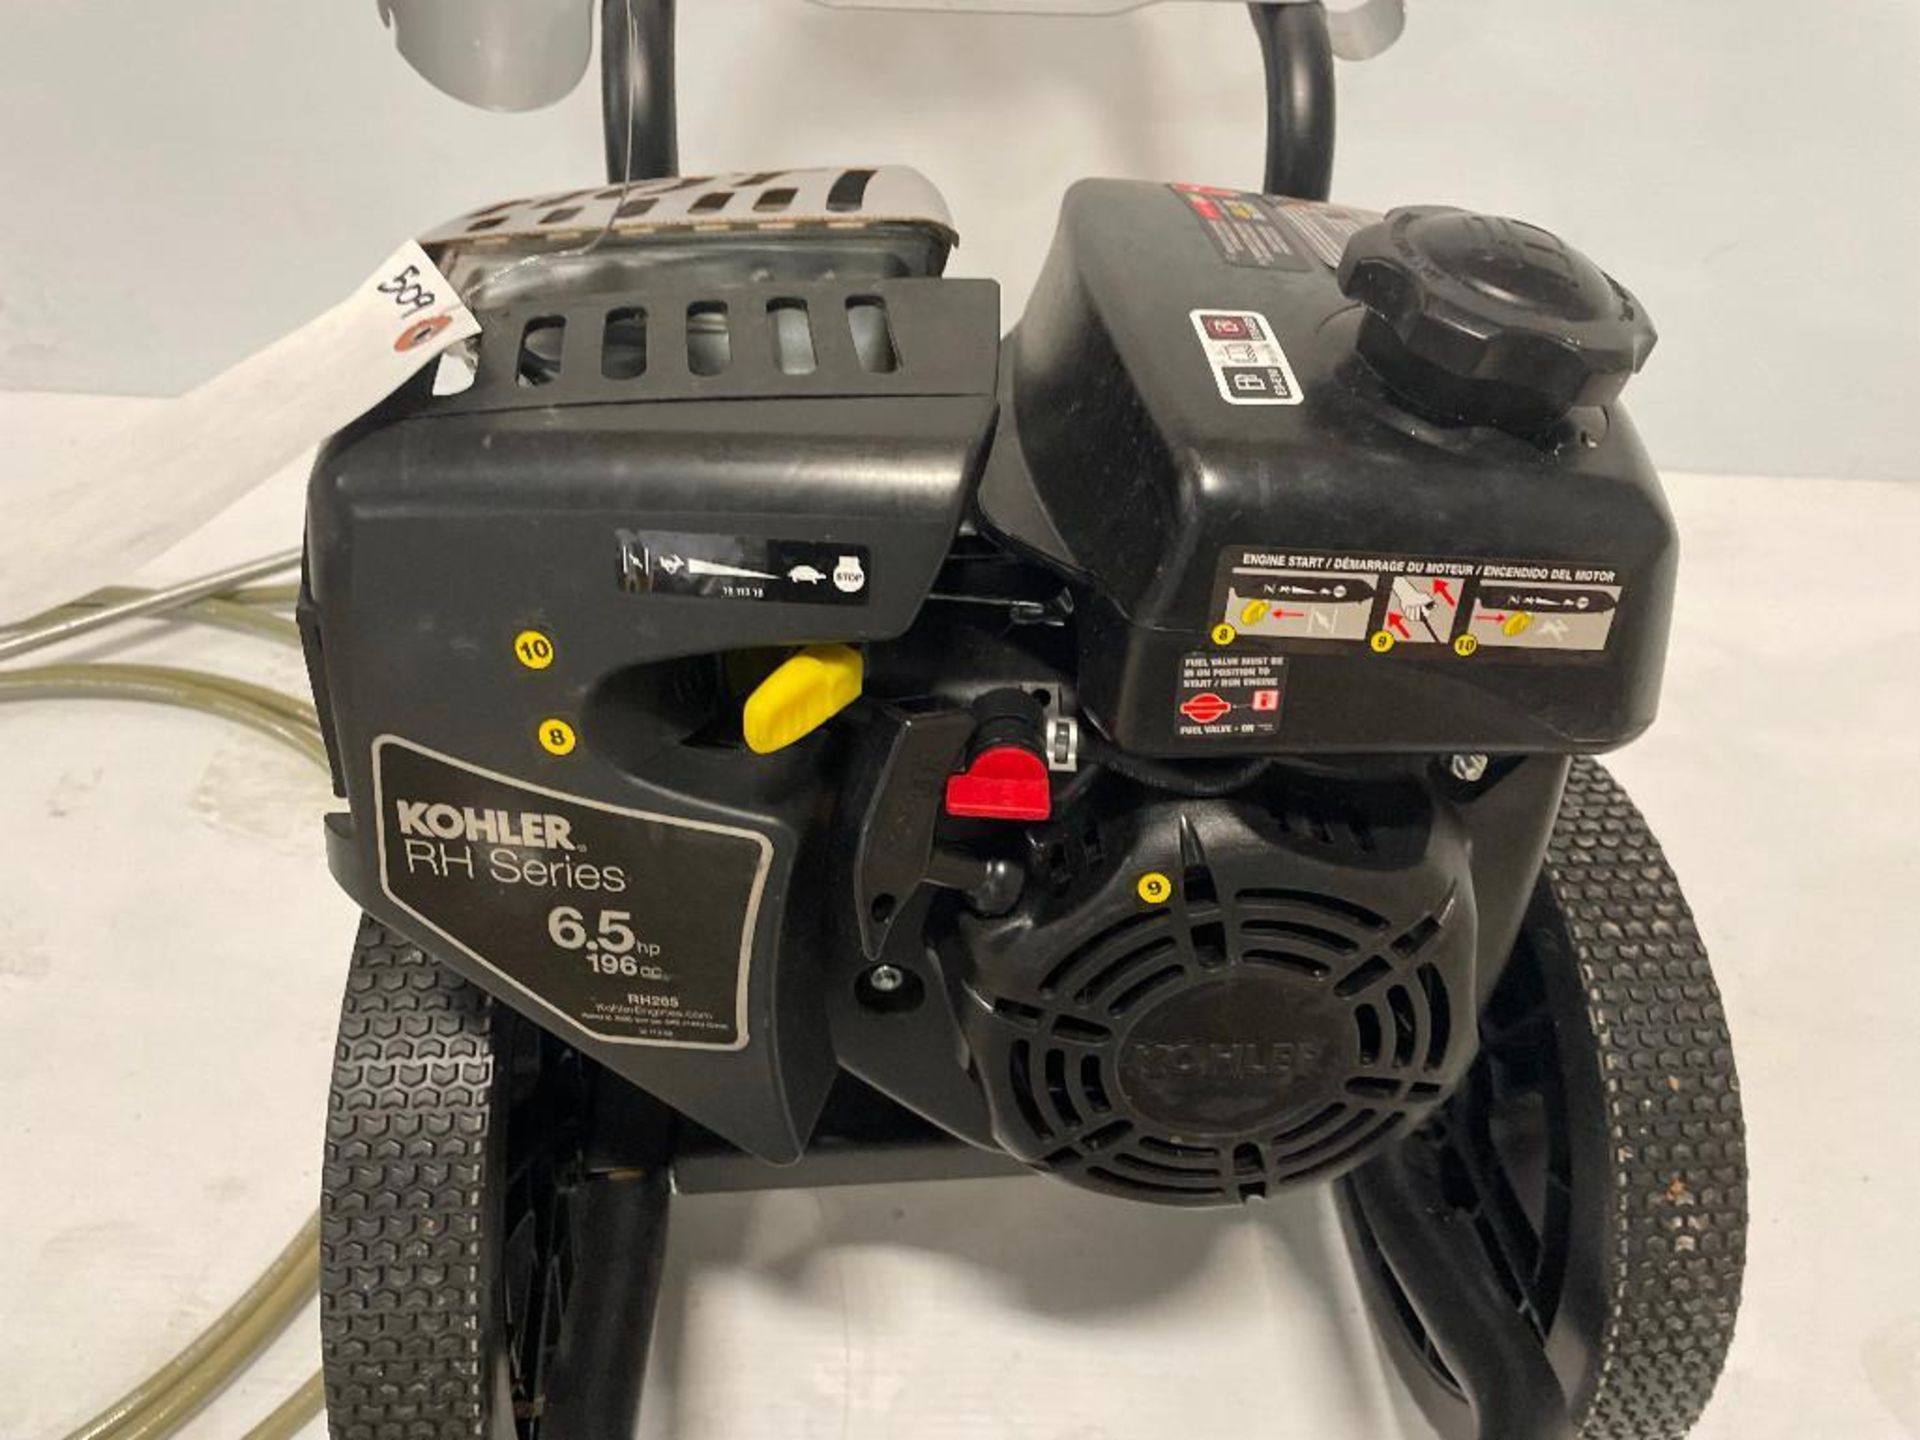 Kohler RH Series 6.5 hp Gas Pressure Washer, 3100 PSI, with wand. Located in Hazelwood, MO - Image 4 of 9